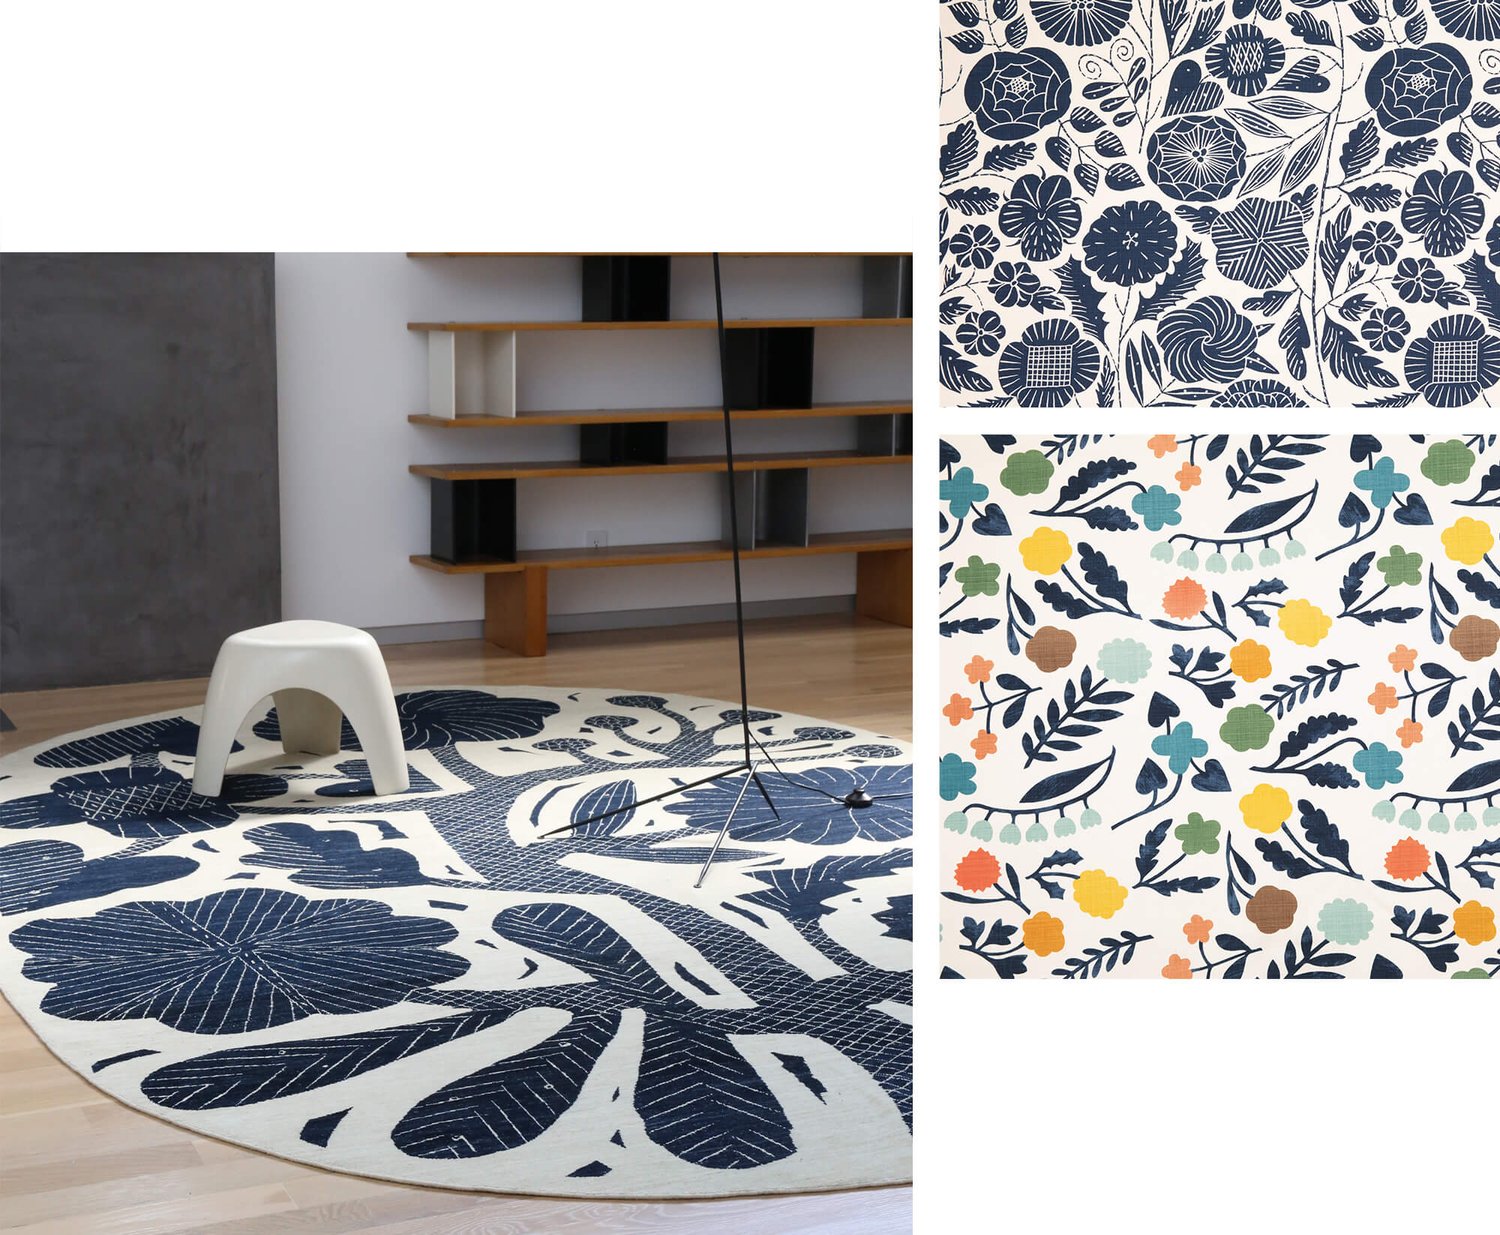 Three images displaying different patterns of fabrics and rug.